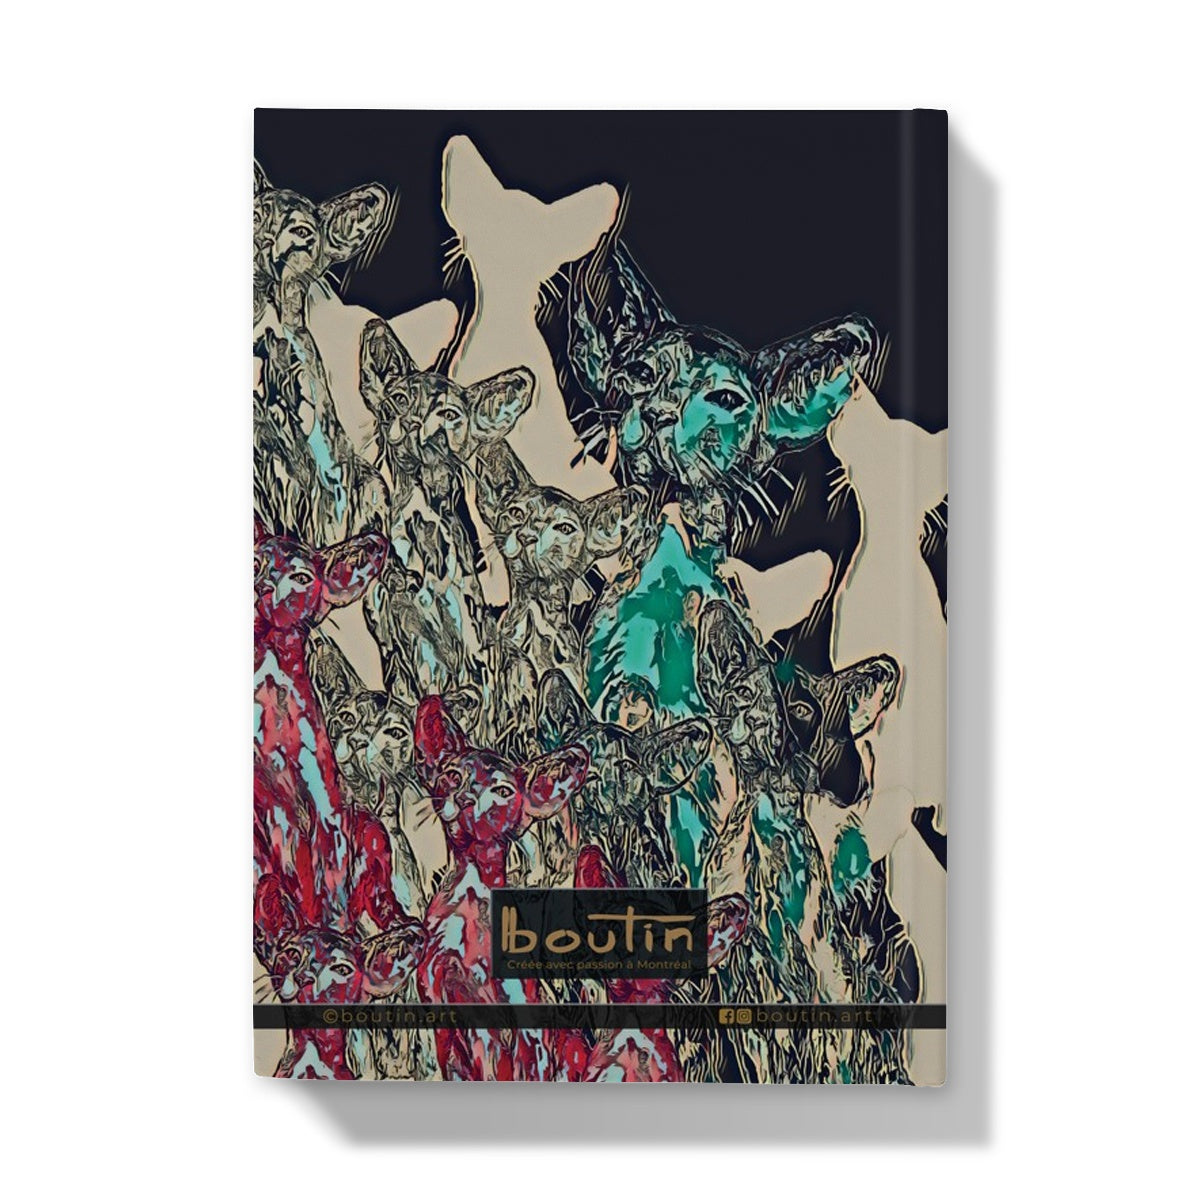 The Marine Cleopatra - Notebook by the artist Boutin